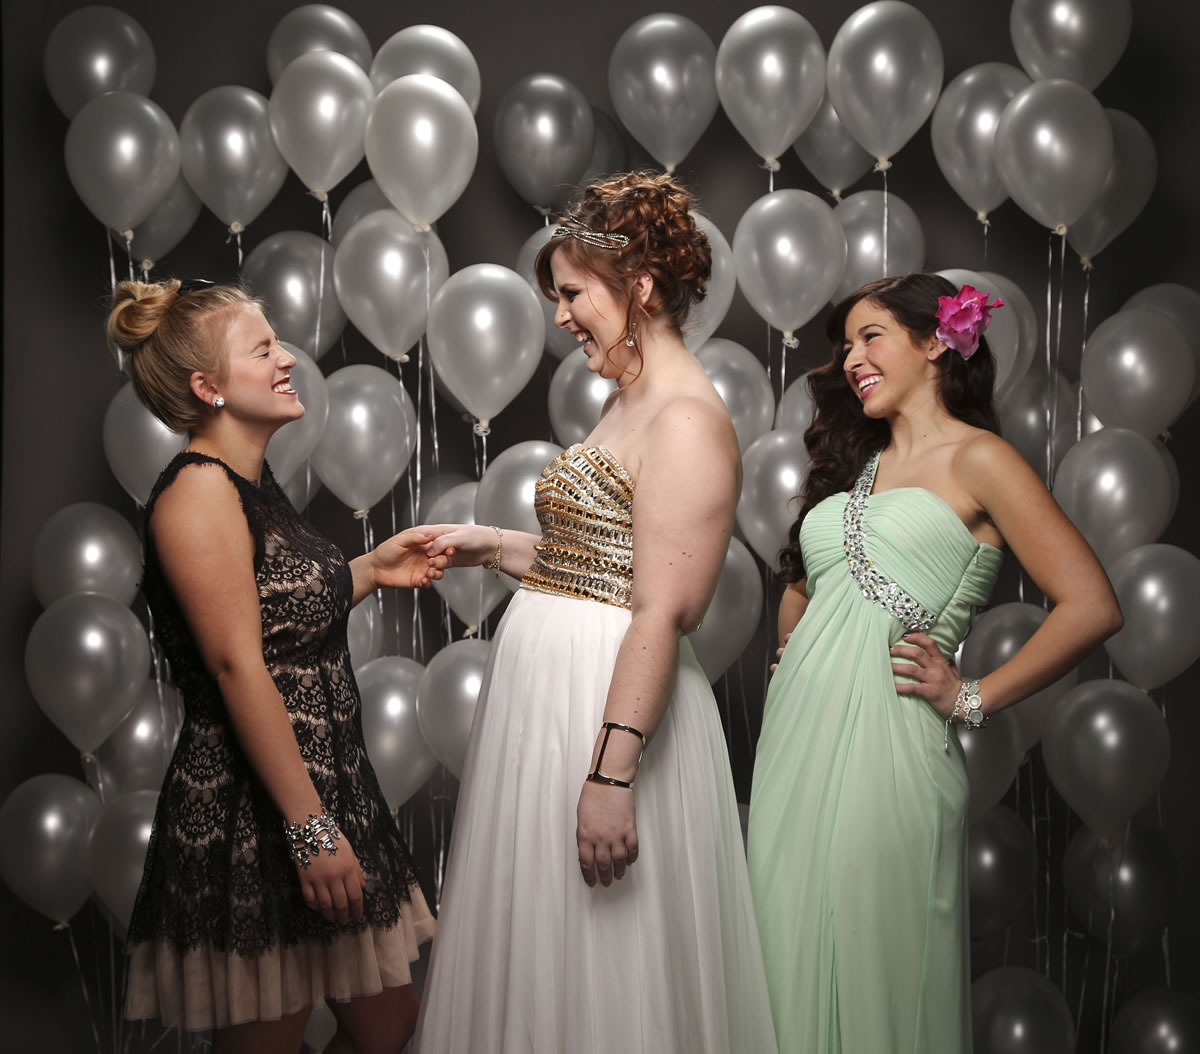 Kali Mann, from left, Sophie Heyman, and Emilee Hassanzadeh don prom looks at the Mall of America in Bloomington, Minn.